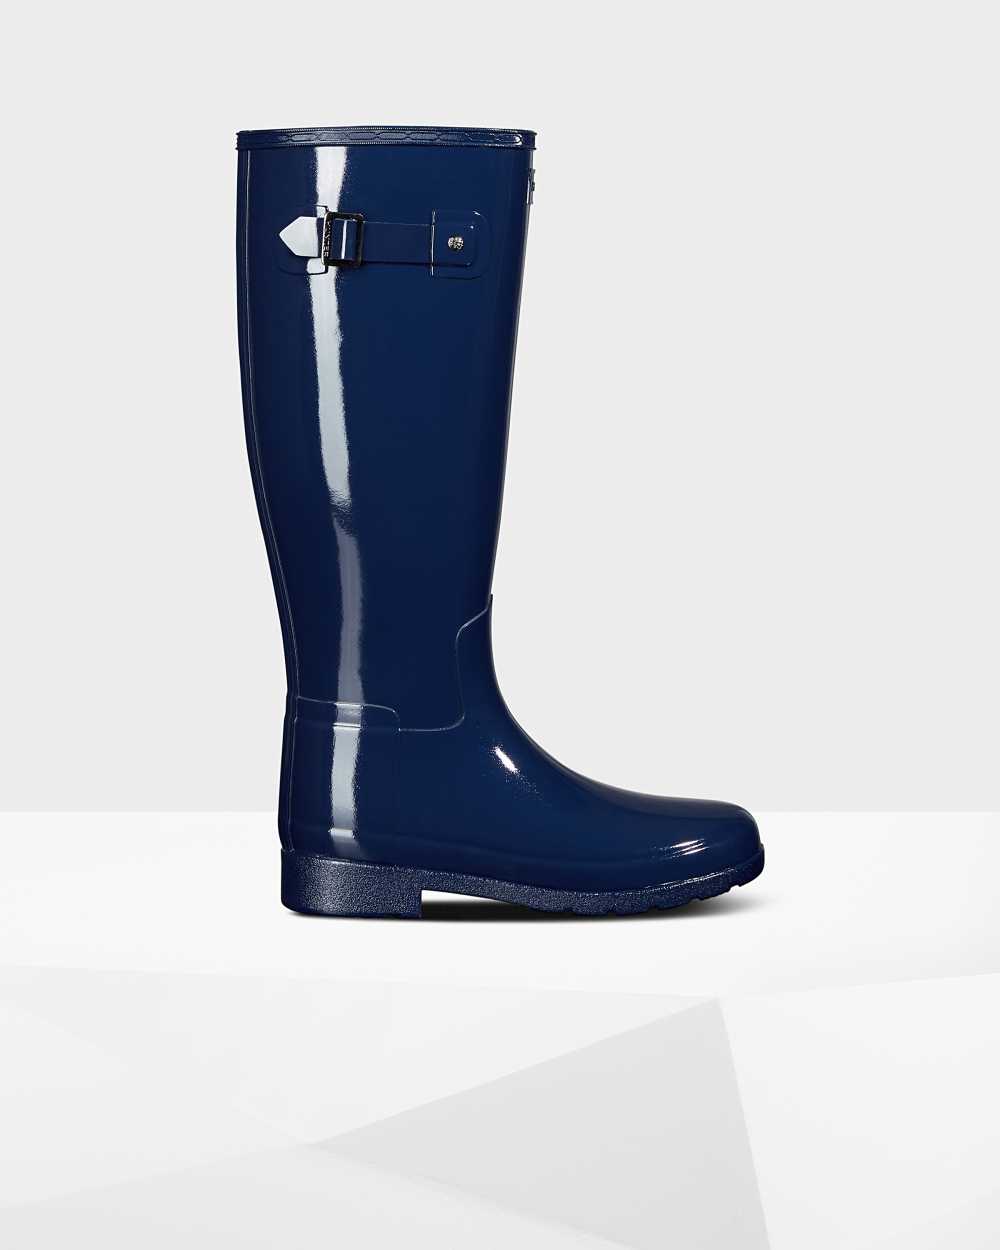 Cheap Hunter Boots For Sale Online | Free Shipping South Africa